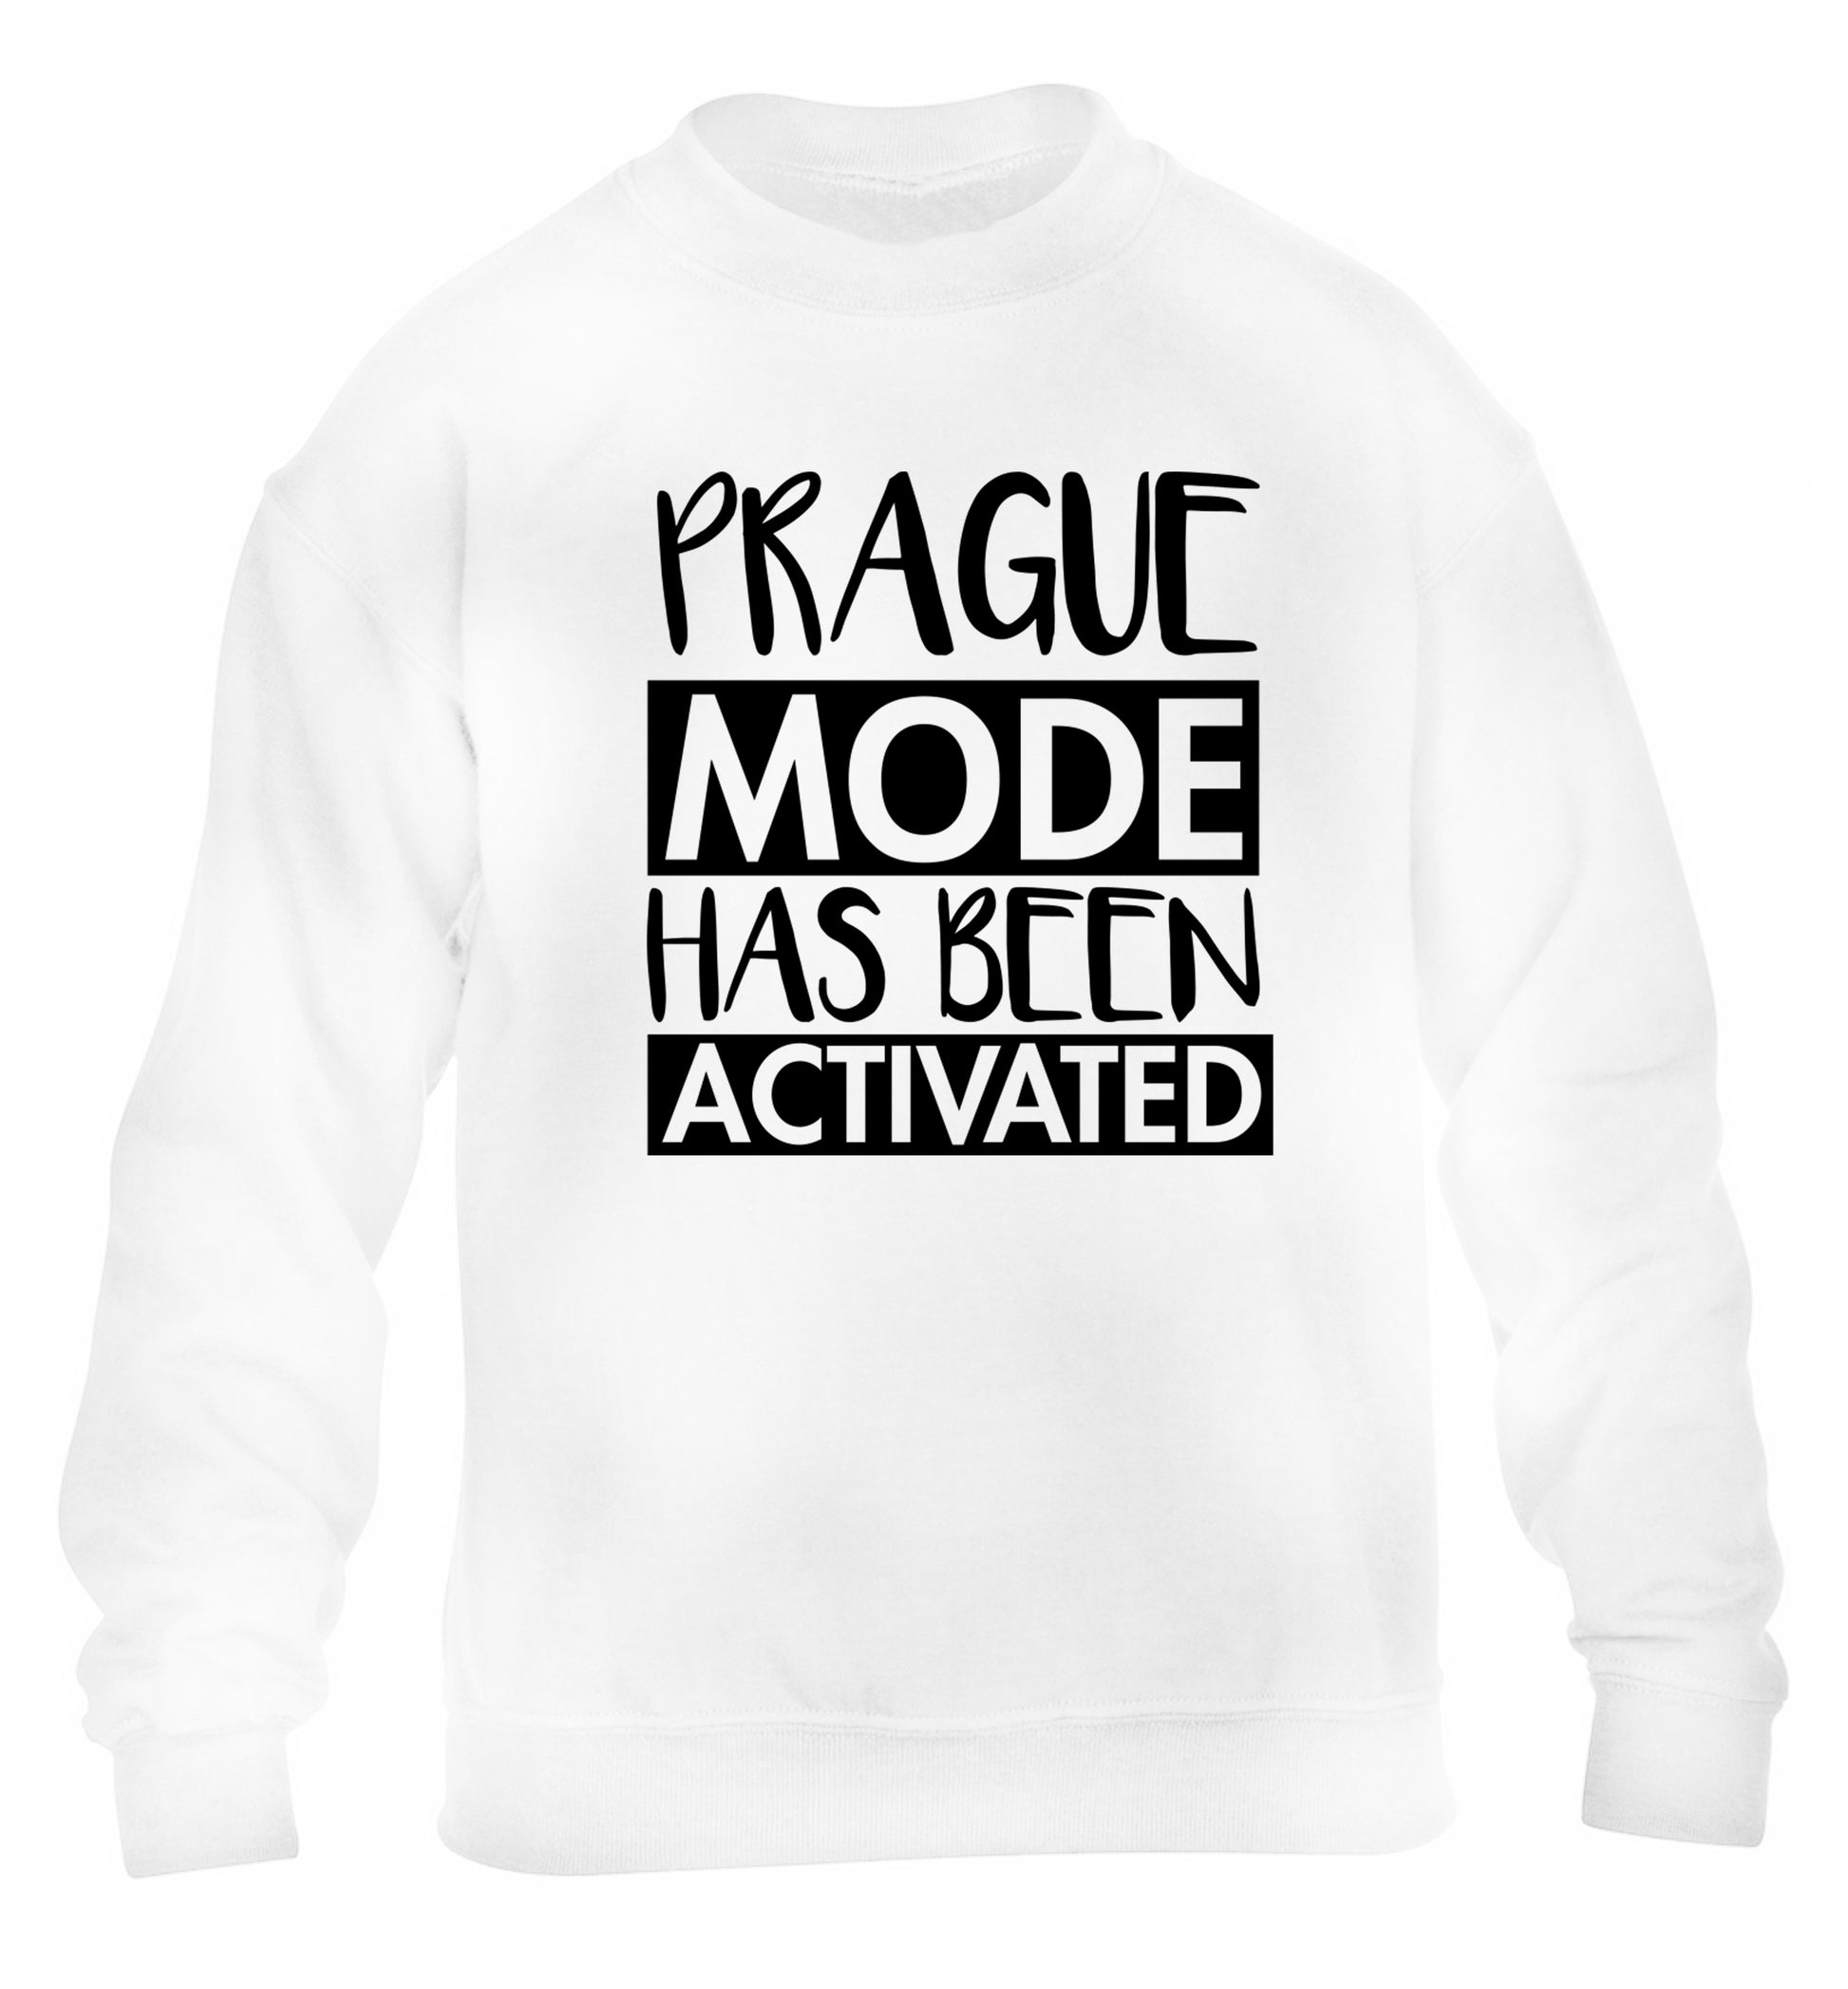 Prague mode has been activated children's white sweater 12-13 Years